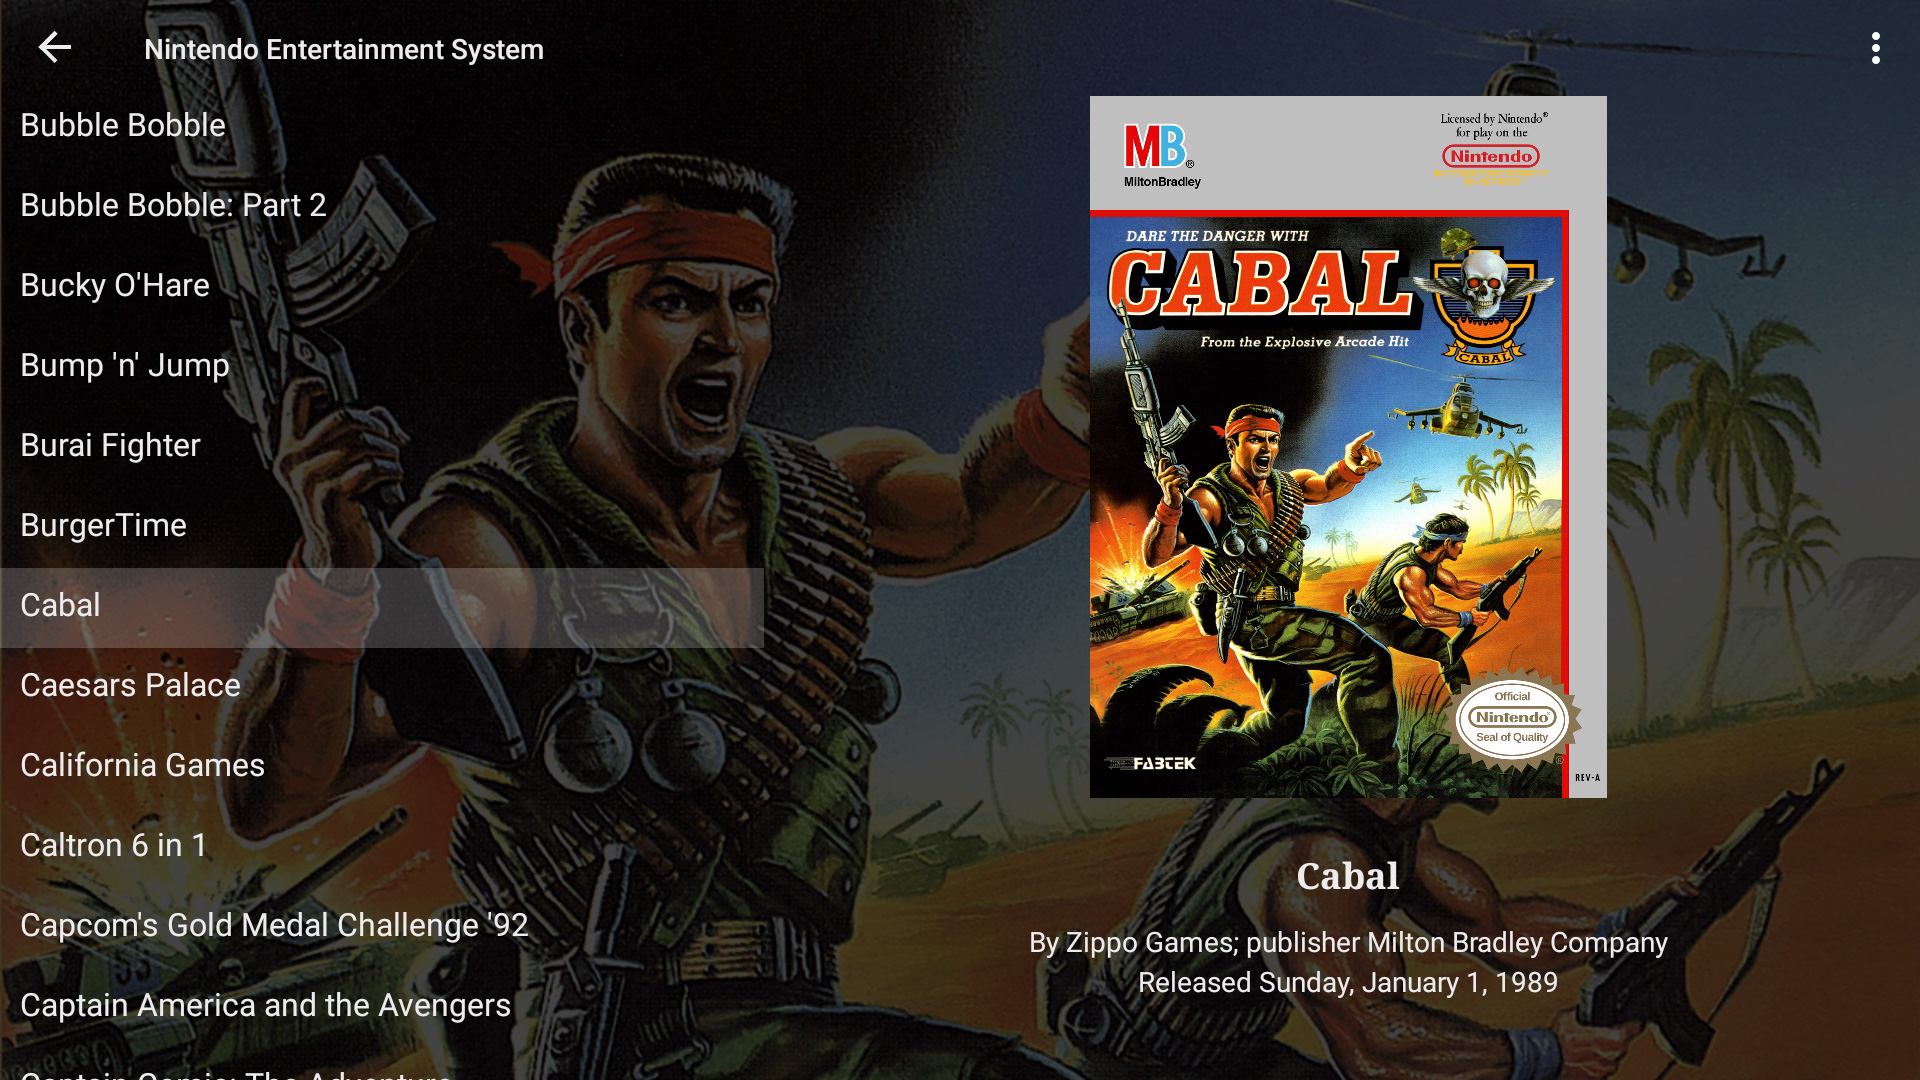 LaunchBox for Android Screenshot - Nintendo Entertainment System - Cabal